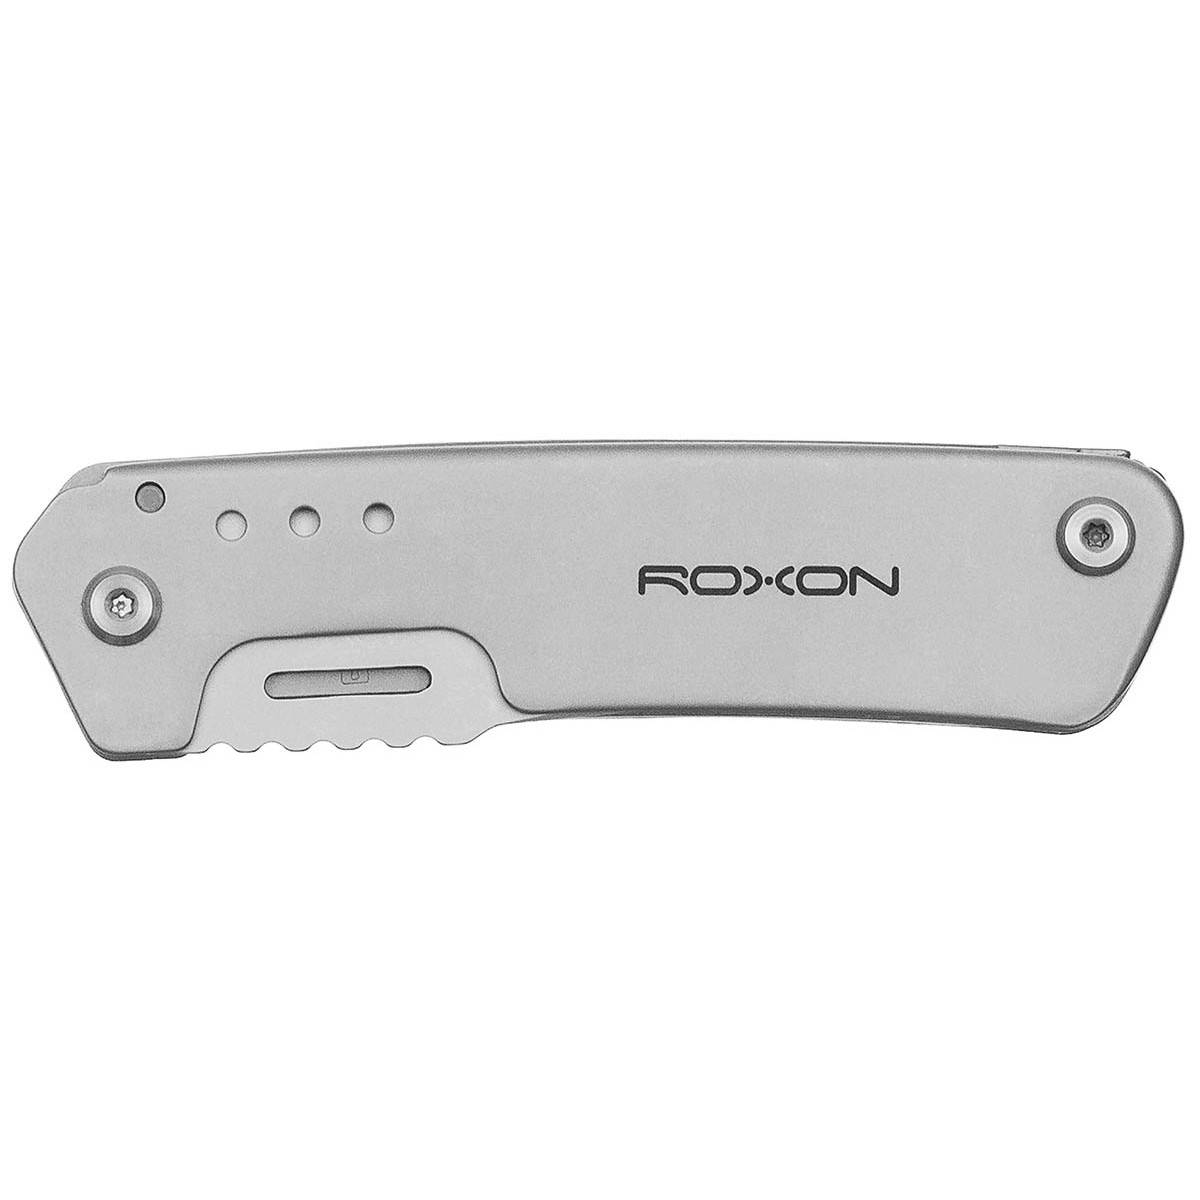 KNIFE-SCISSORS TOOL - KS - ROXON®, Knives \ Multitools \ Mil-Tec  , Army Navy Surplus - Tactical, Big variety - Cheap  prices